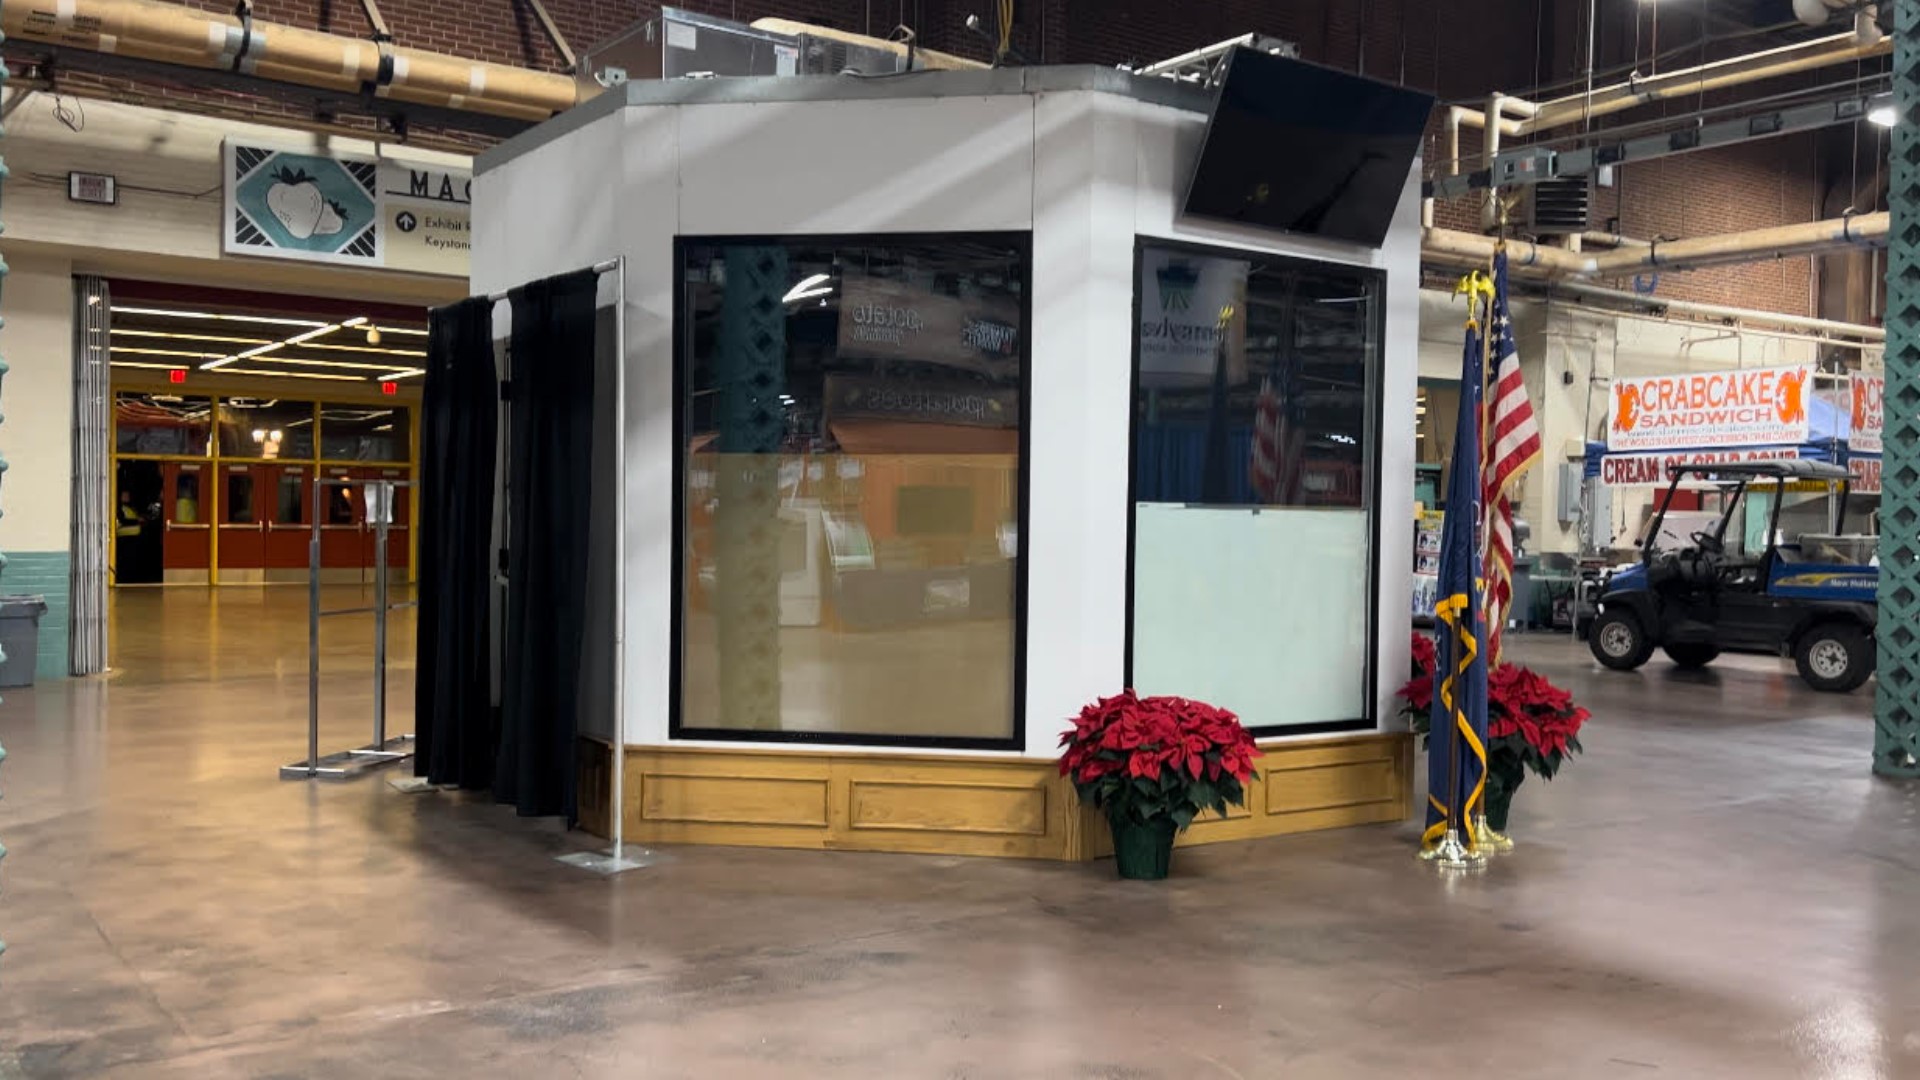 The 32nd Annual Pa. Farm Show Butter Sculpture unveiling is set to take place at 10:00 a.m. at the Pennsylvania Farm Show Complex.